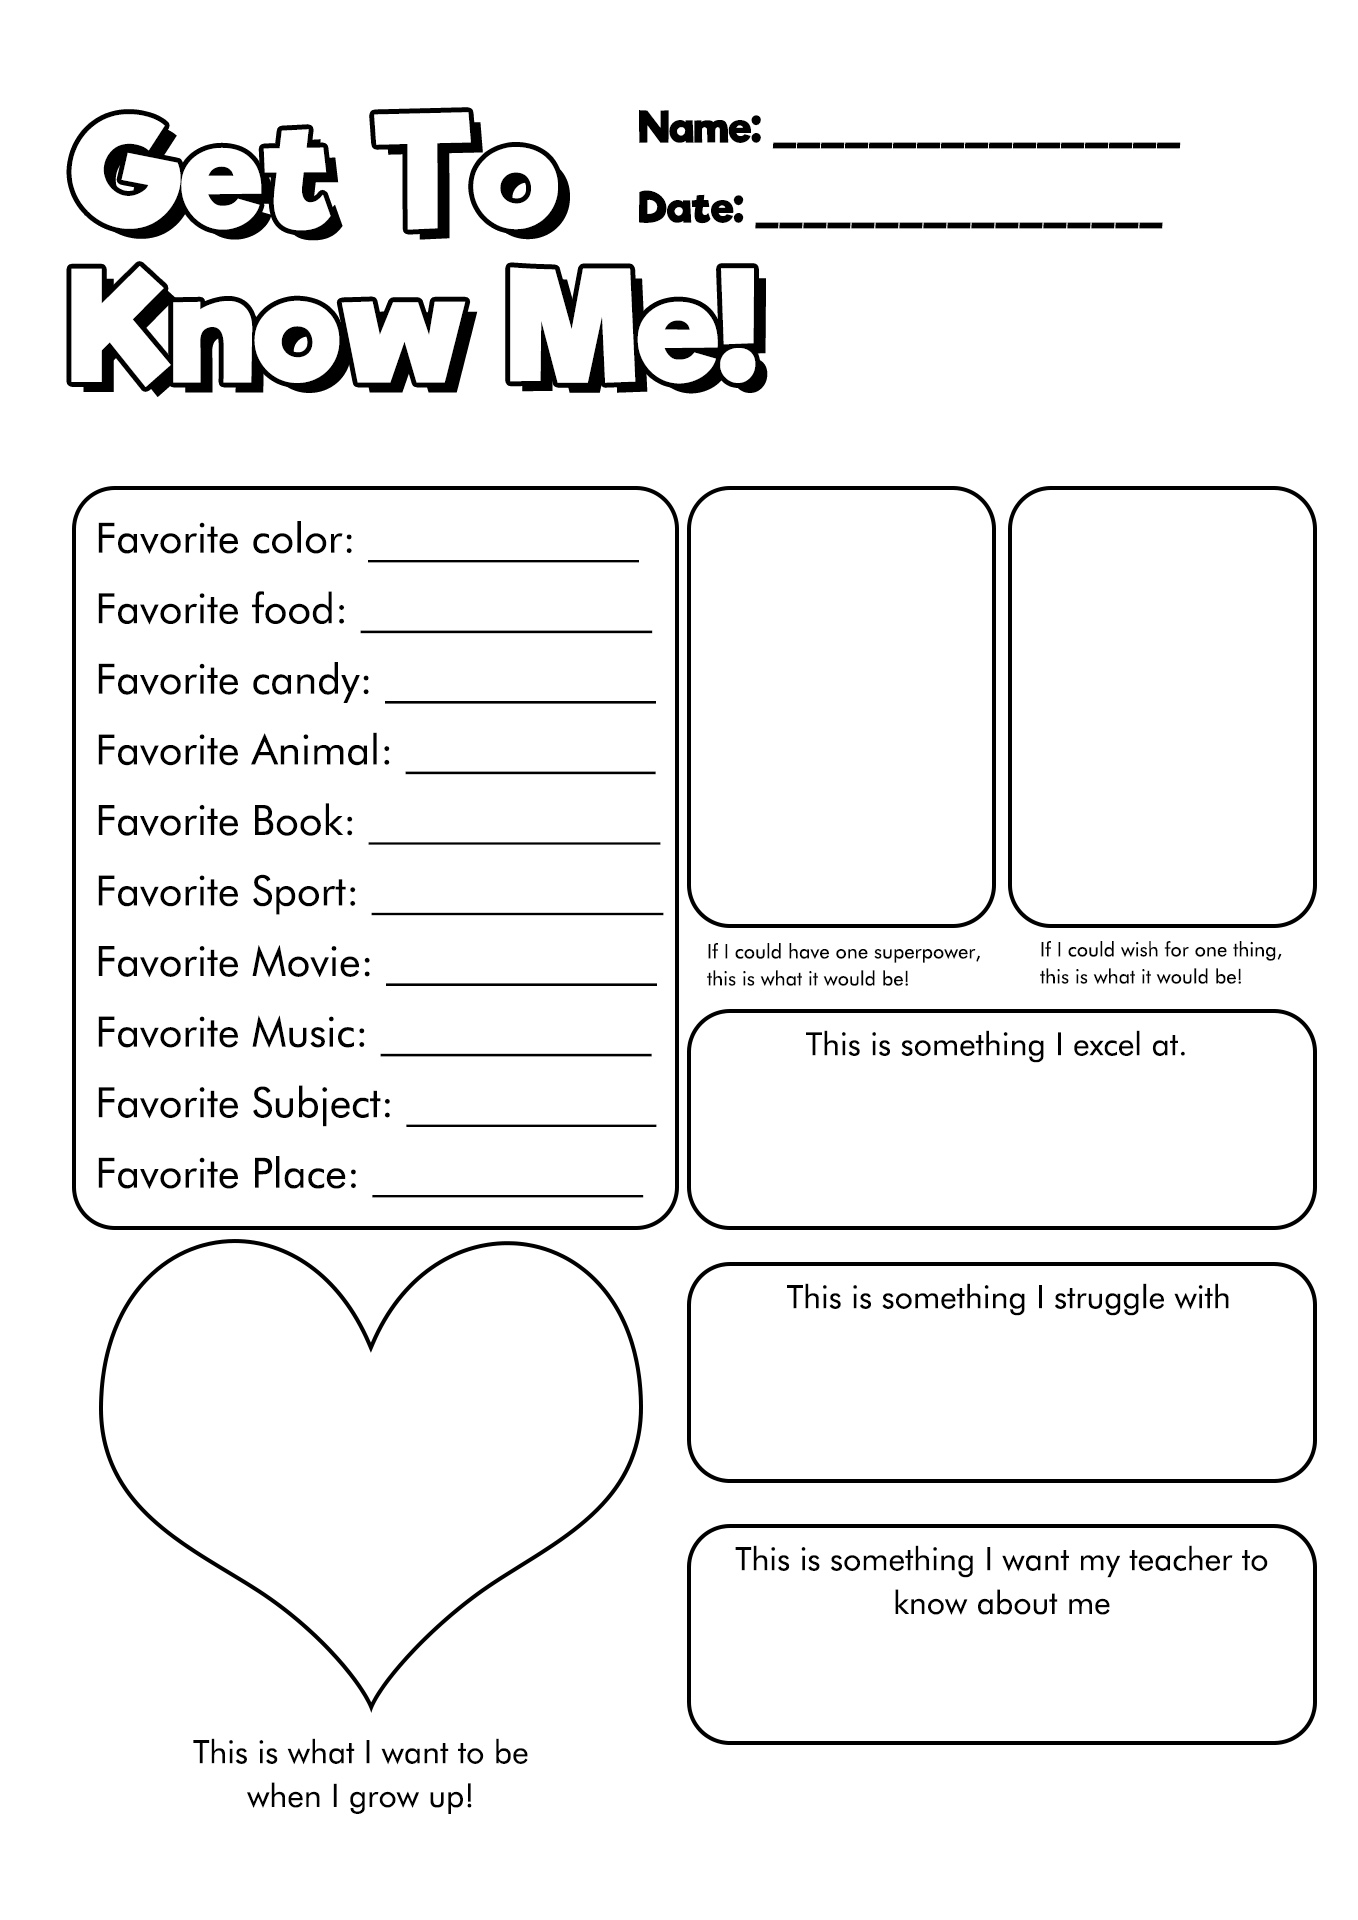 All About Me Student Worksheet Image